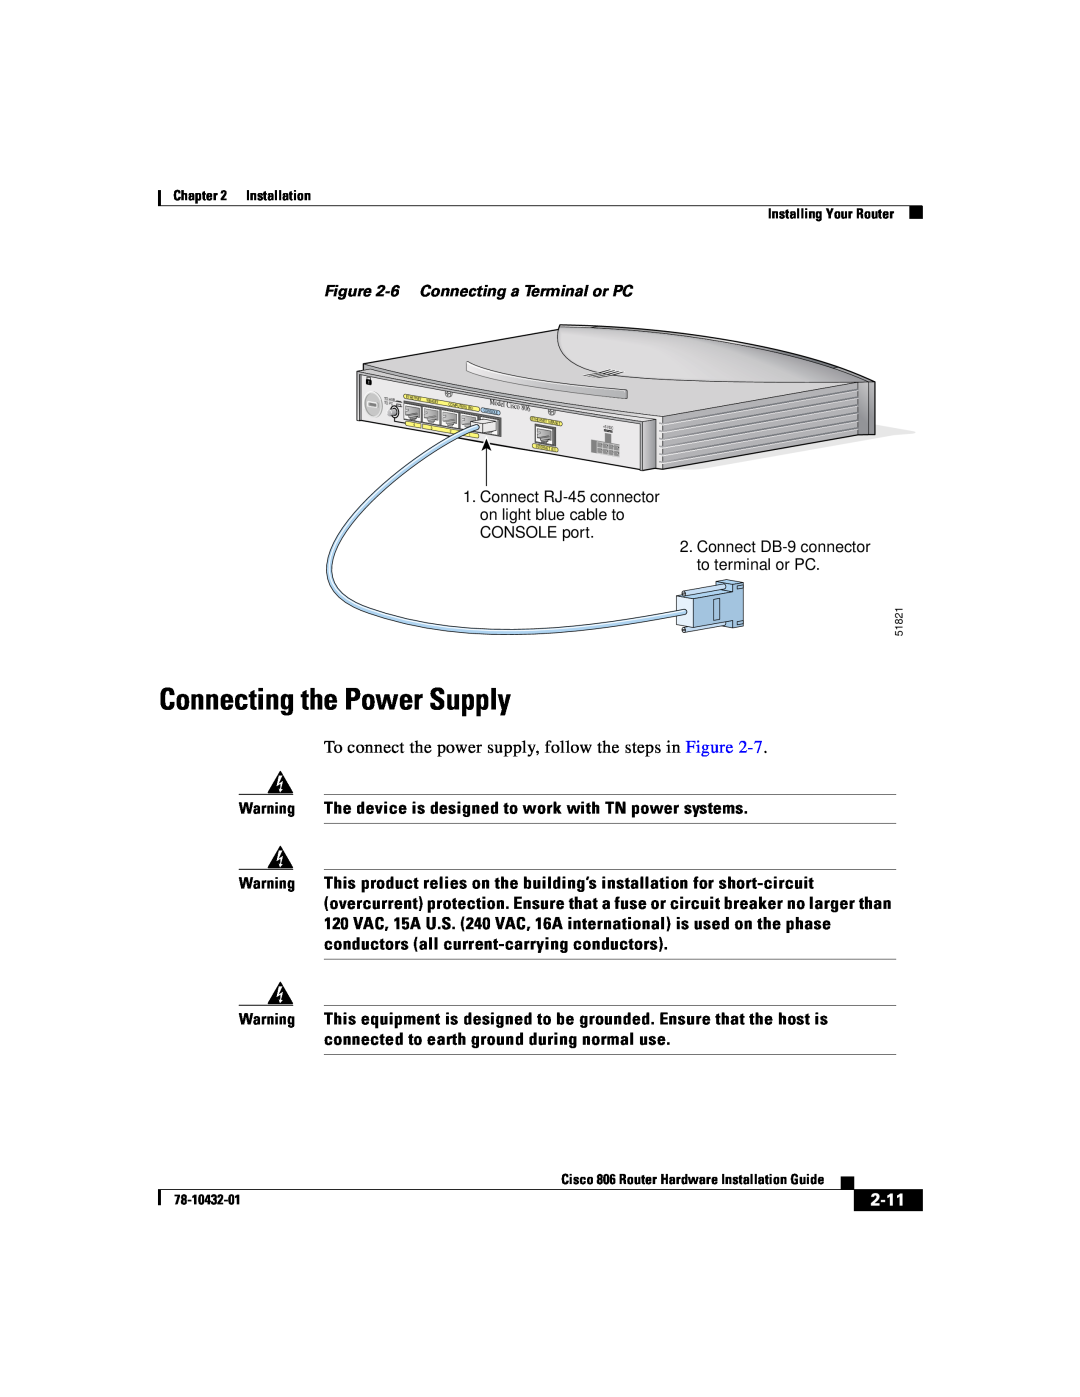 Cisco Systems 806 manual Connecting the Power Supply, 2-11 